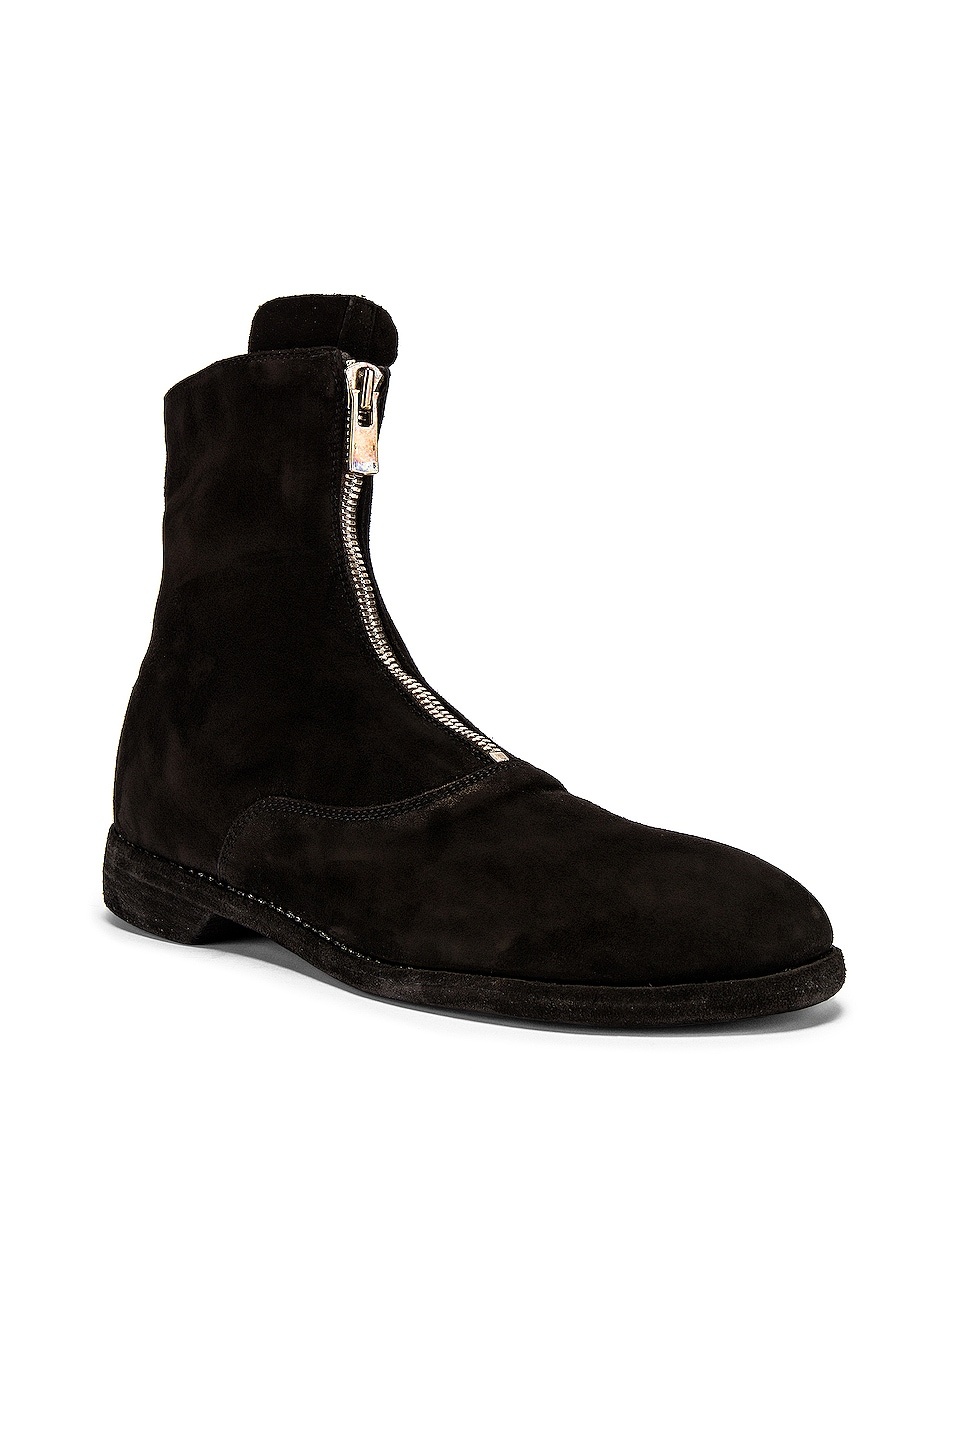 Stag Suede Zipper Boots - 2